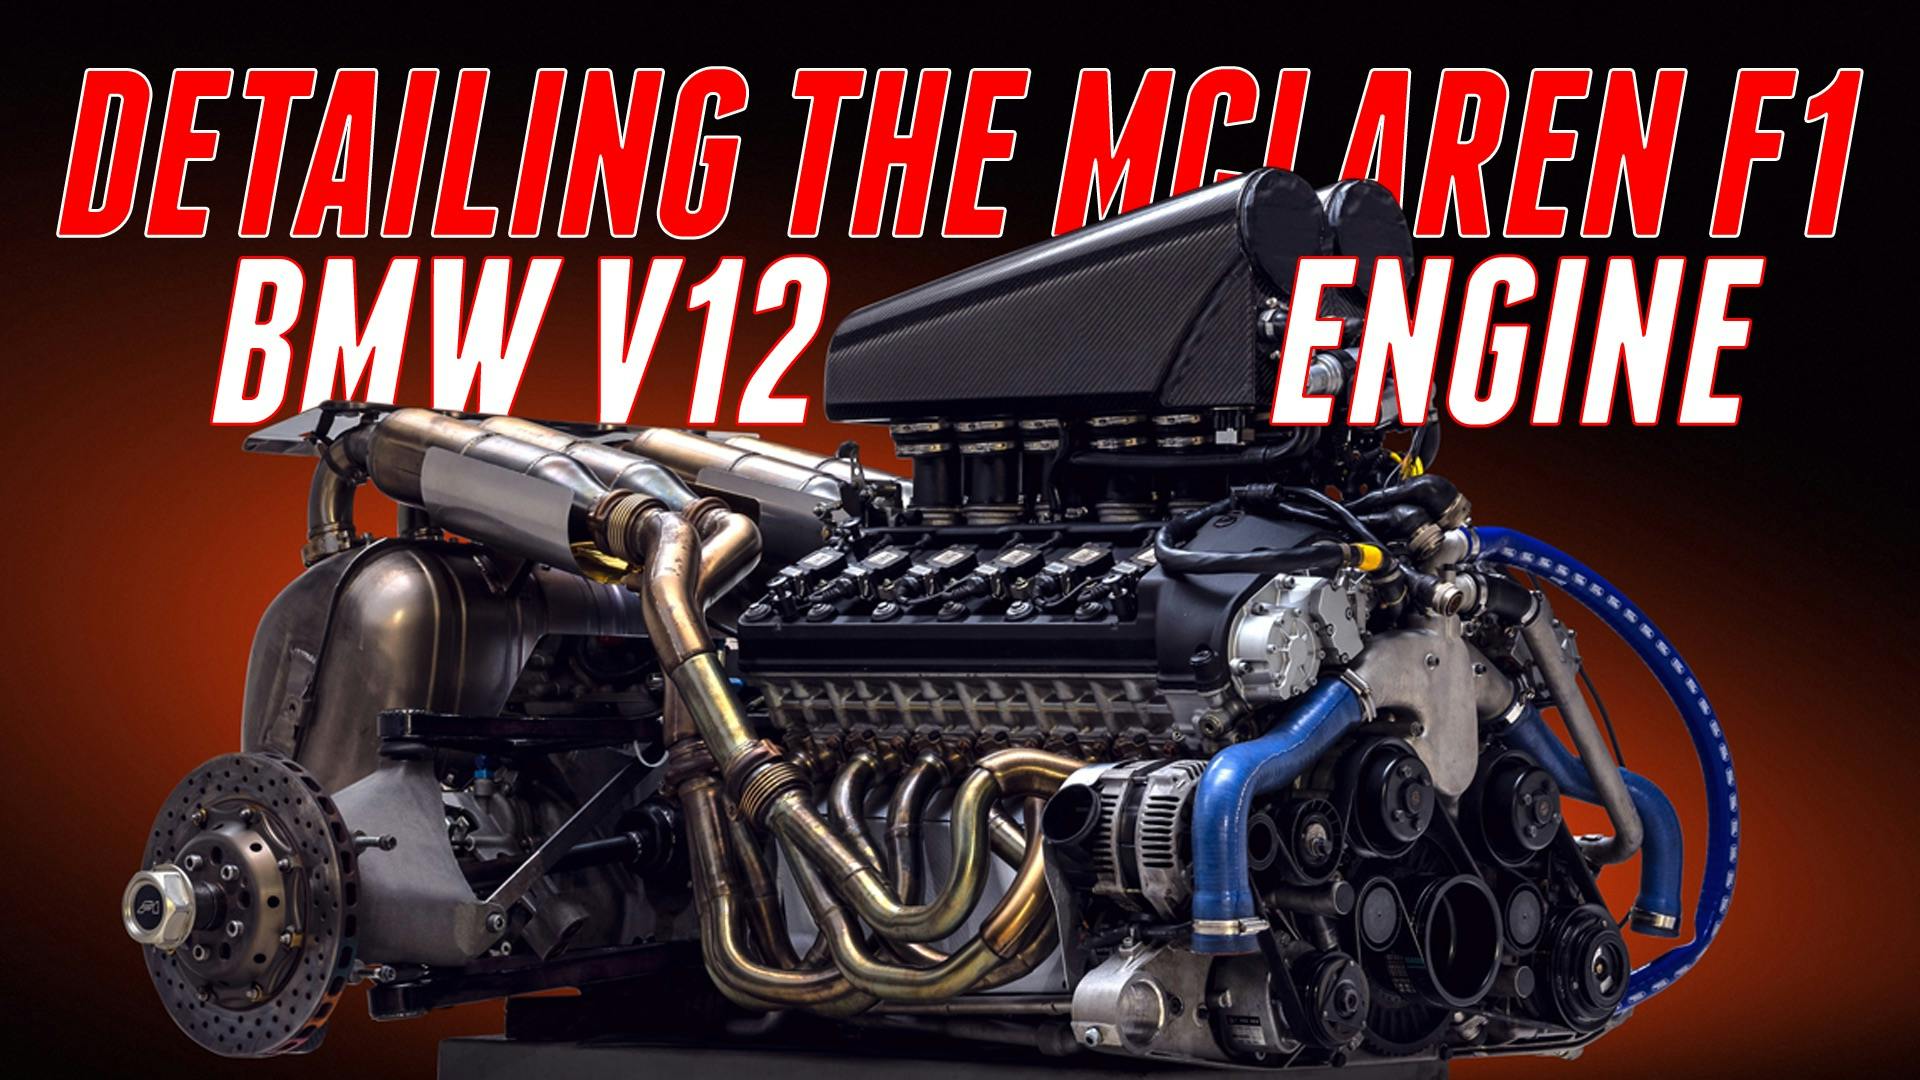 Detailing the McLaren F1 Engine Beyond The Details Hagerty Media